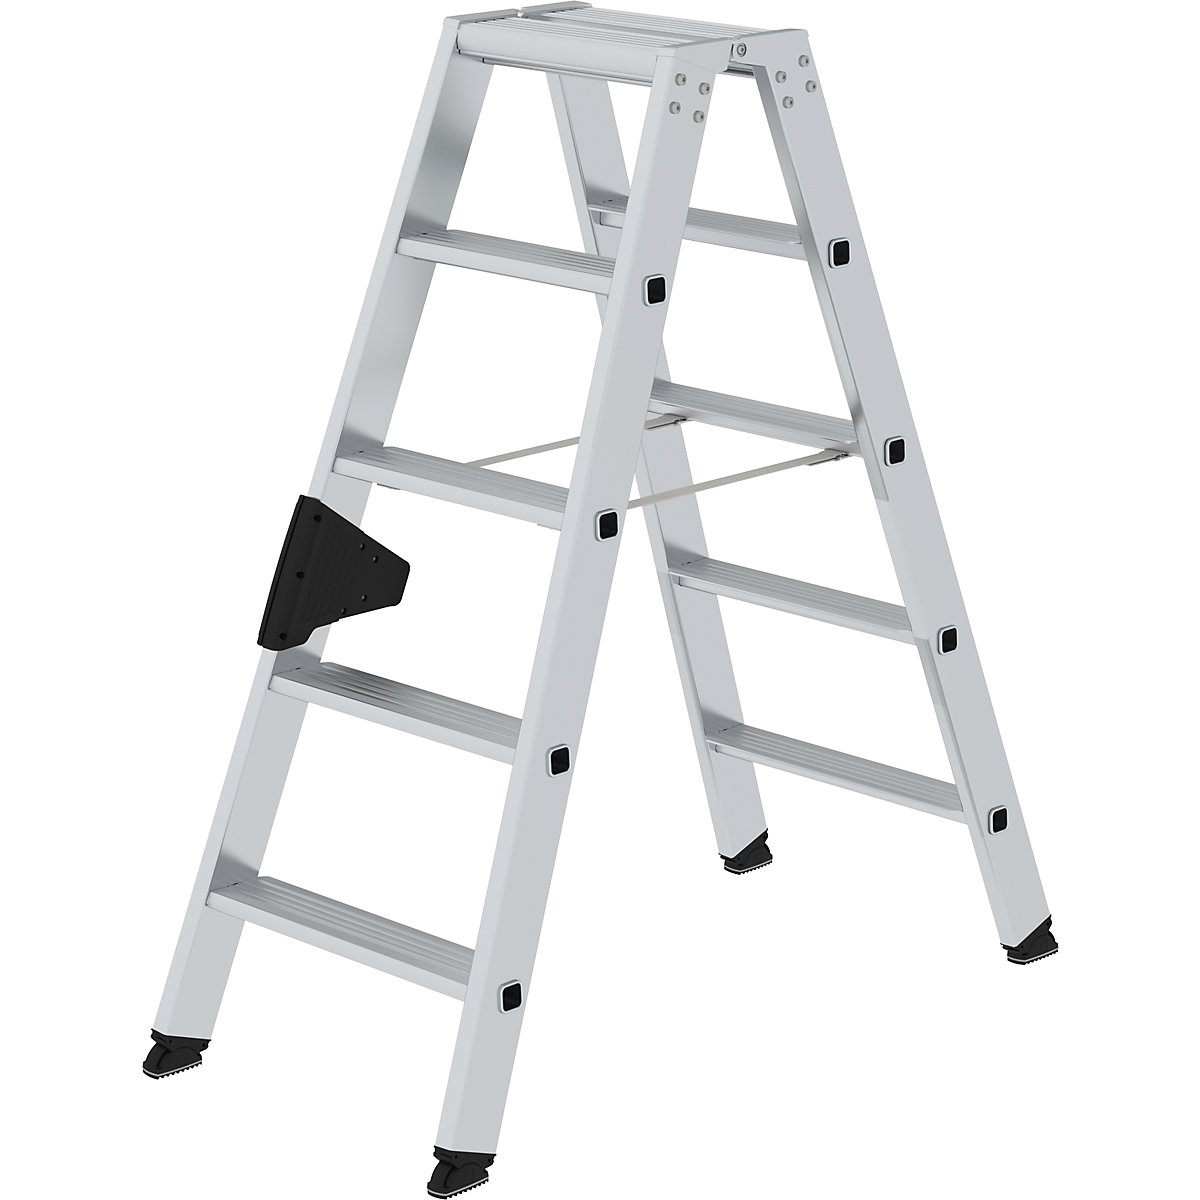 Step ladder, double sided - MUNK